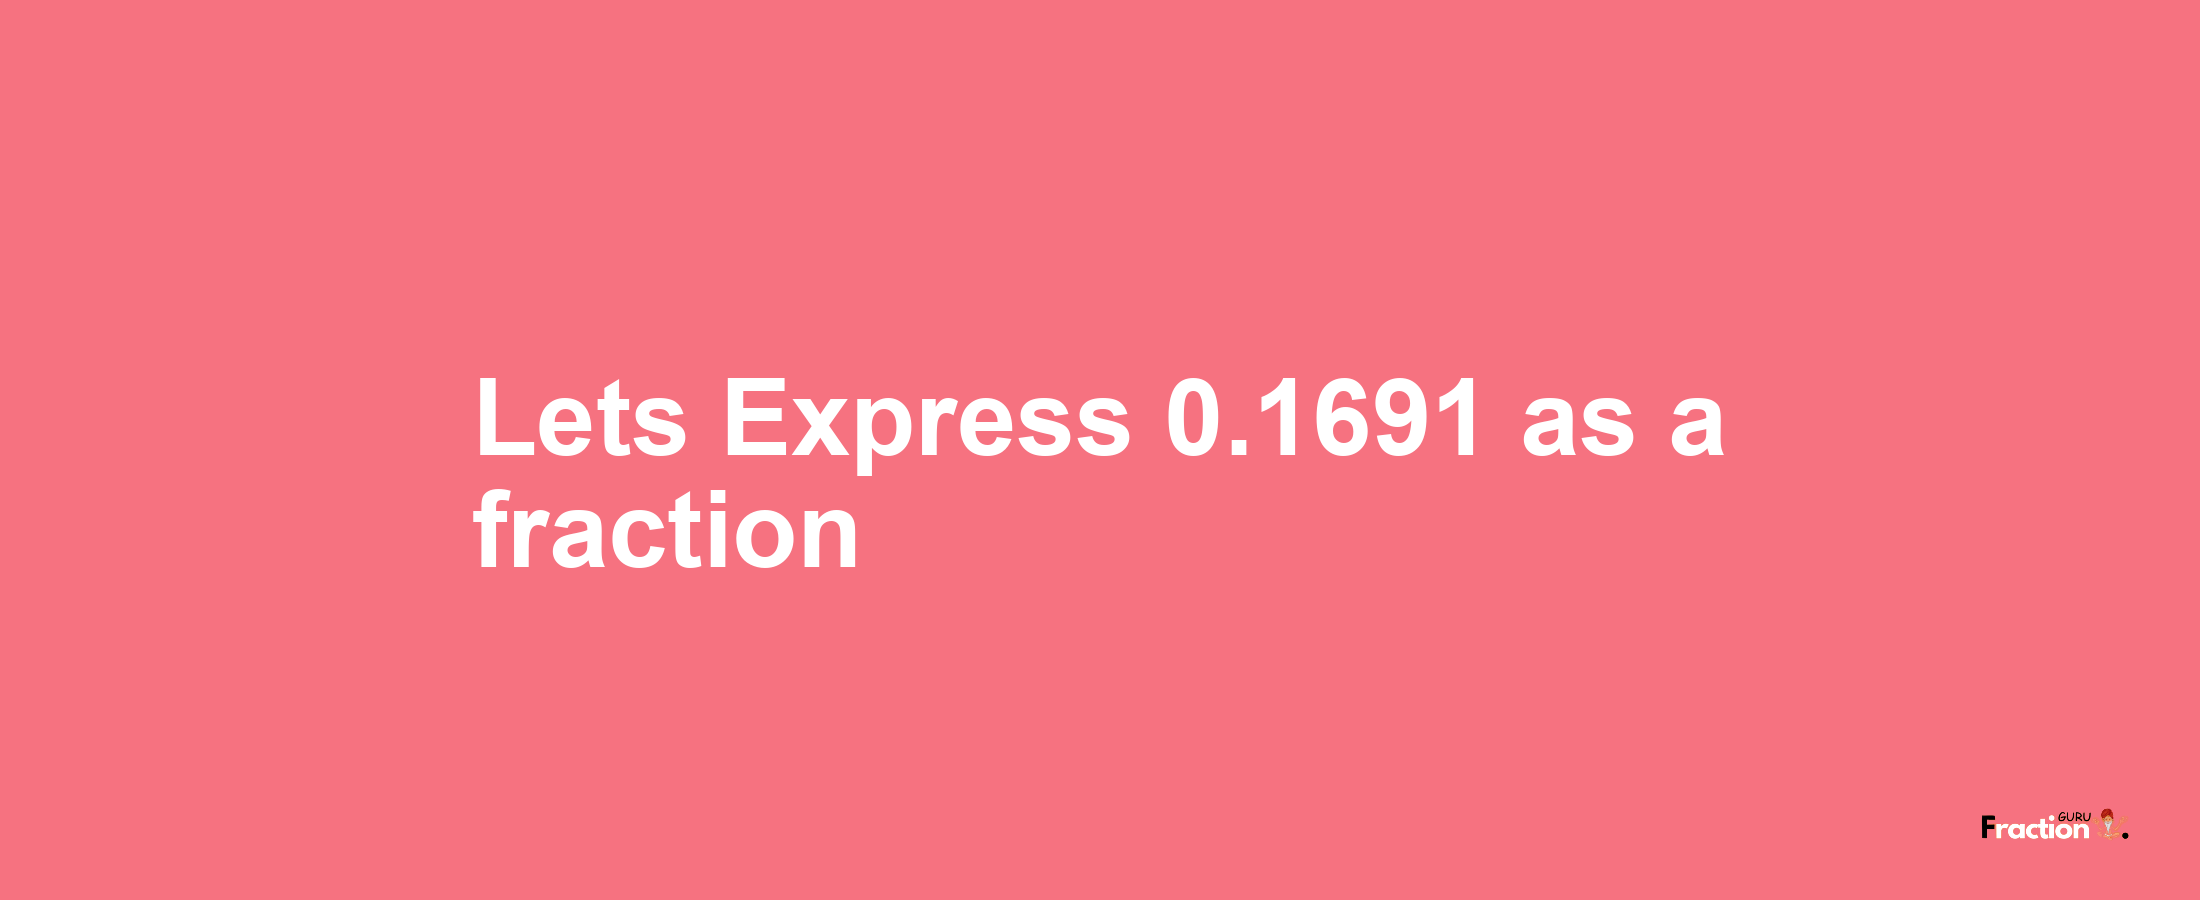 Lets Express 0.1691 as afraction